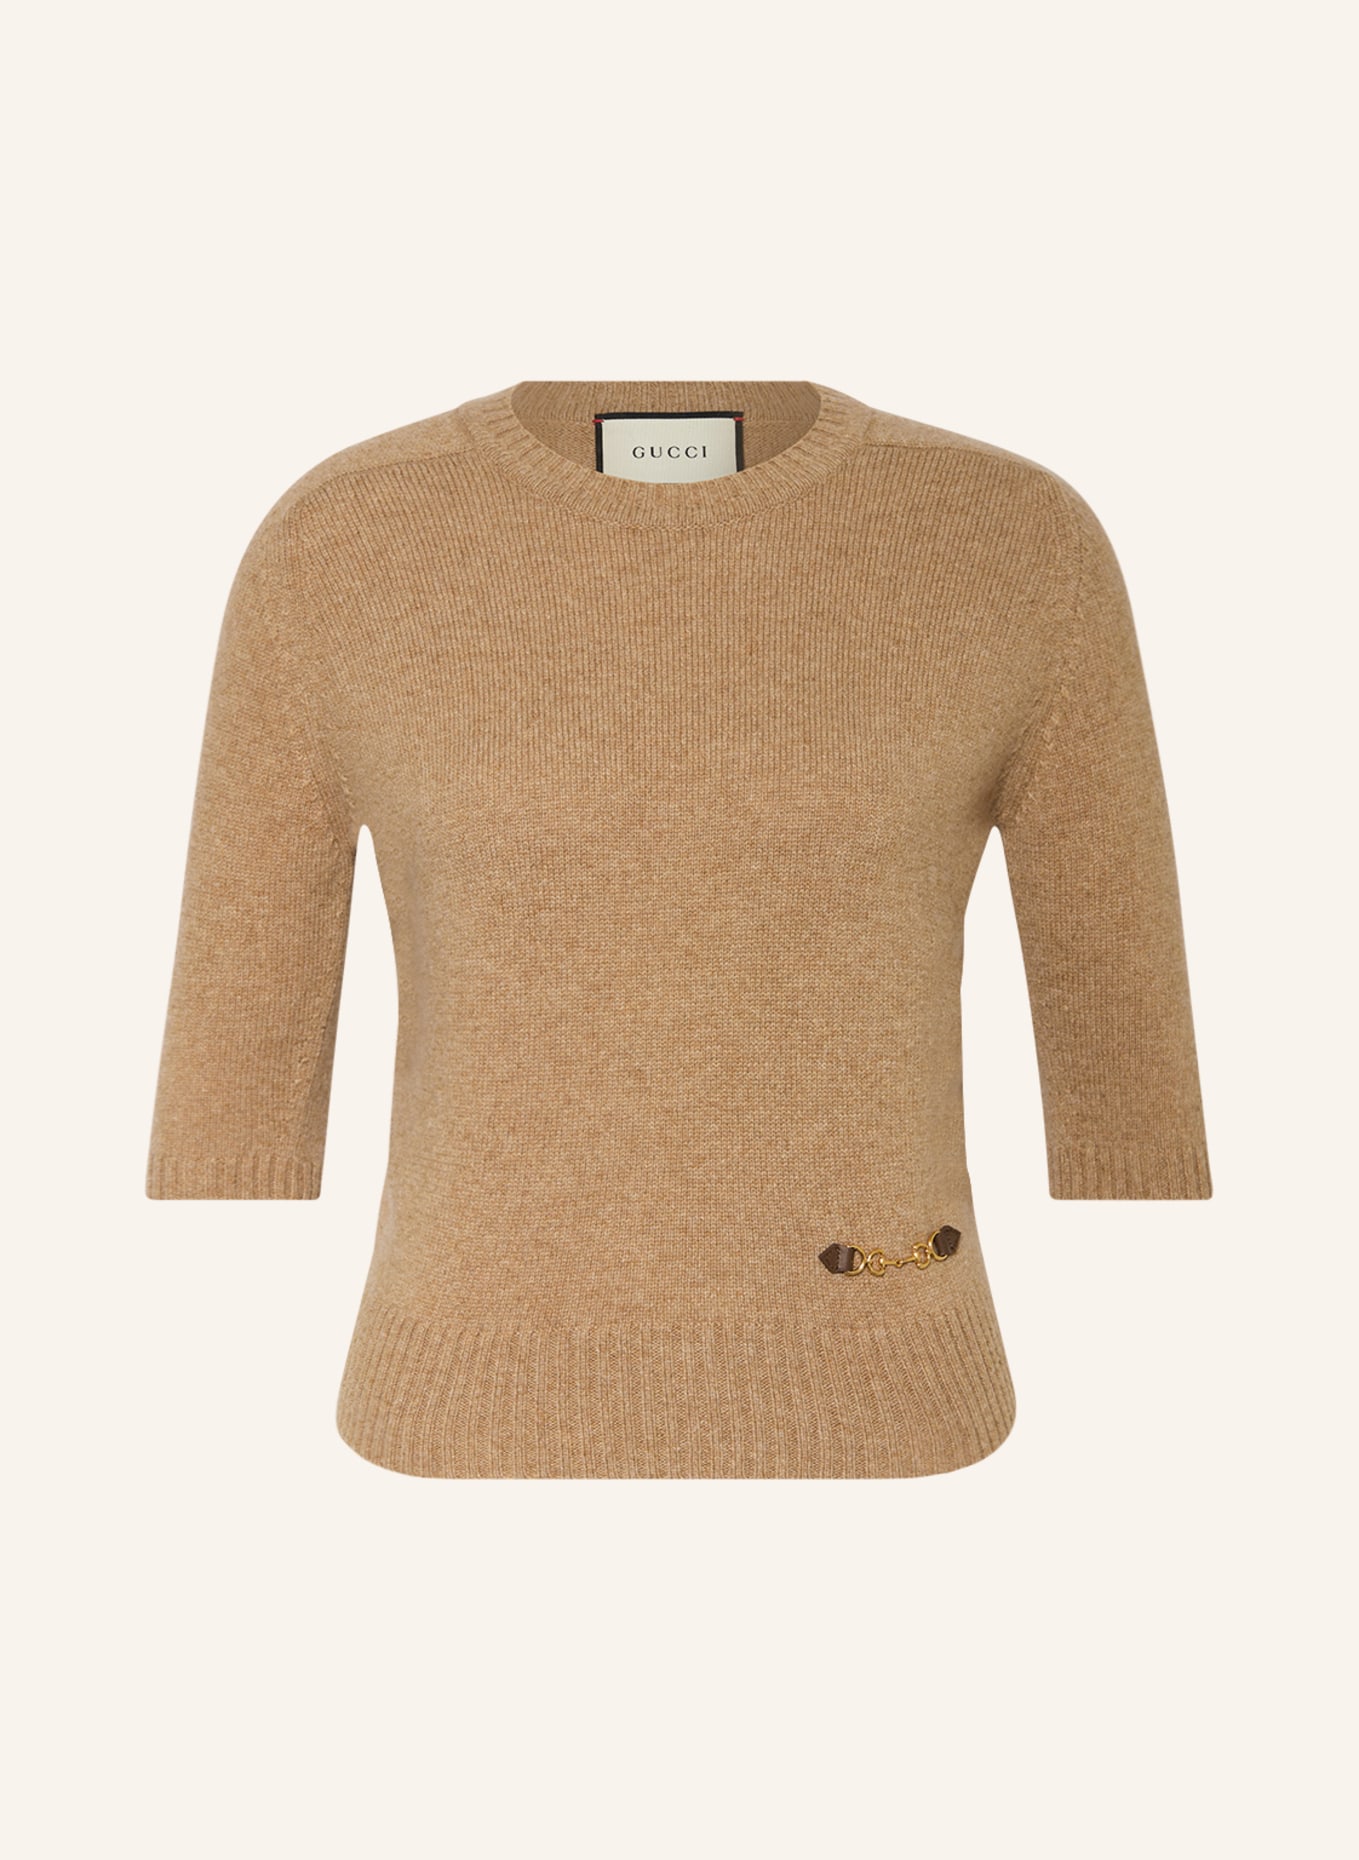 GUCCI Knit shirt in cashmere, Color: BEIGE (Image 1)